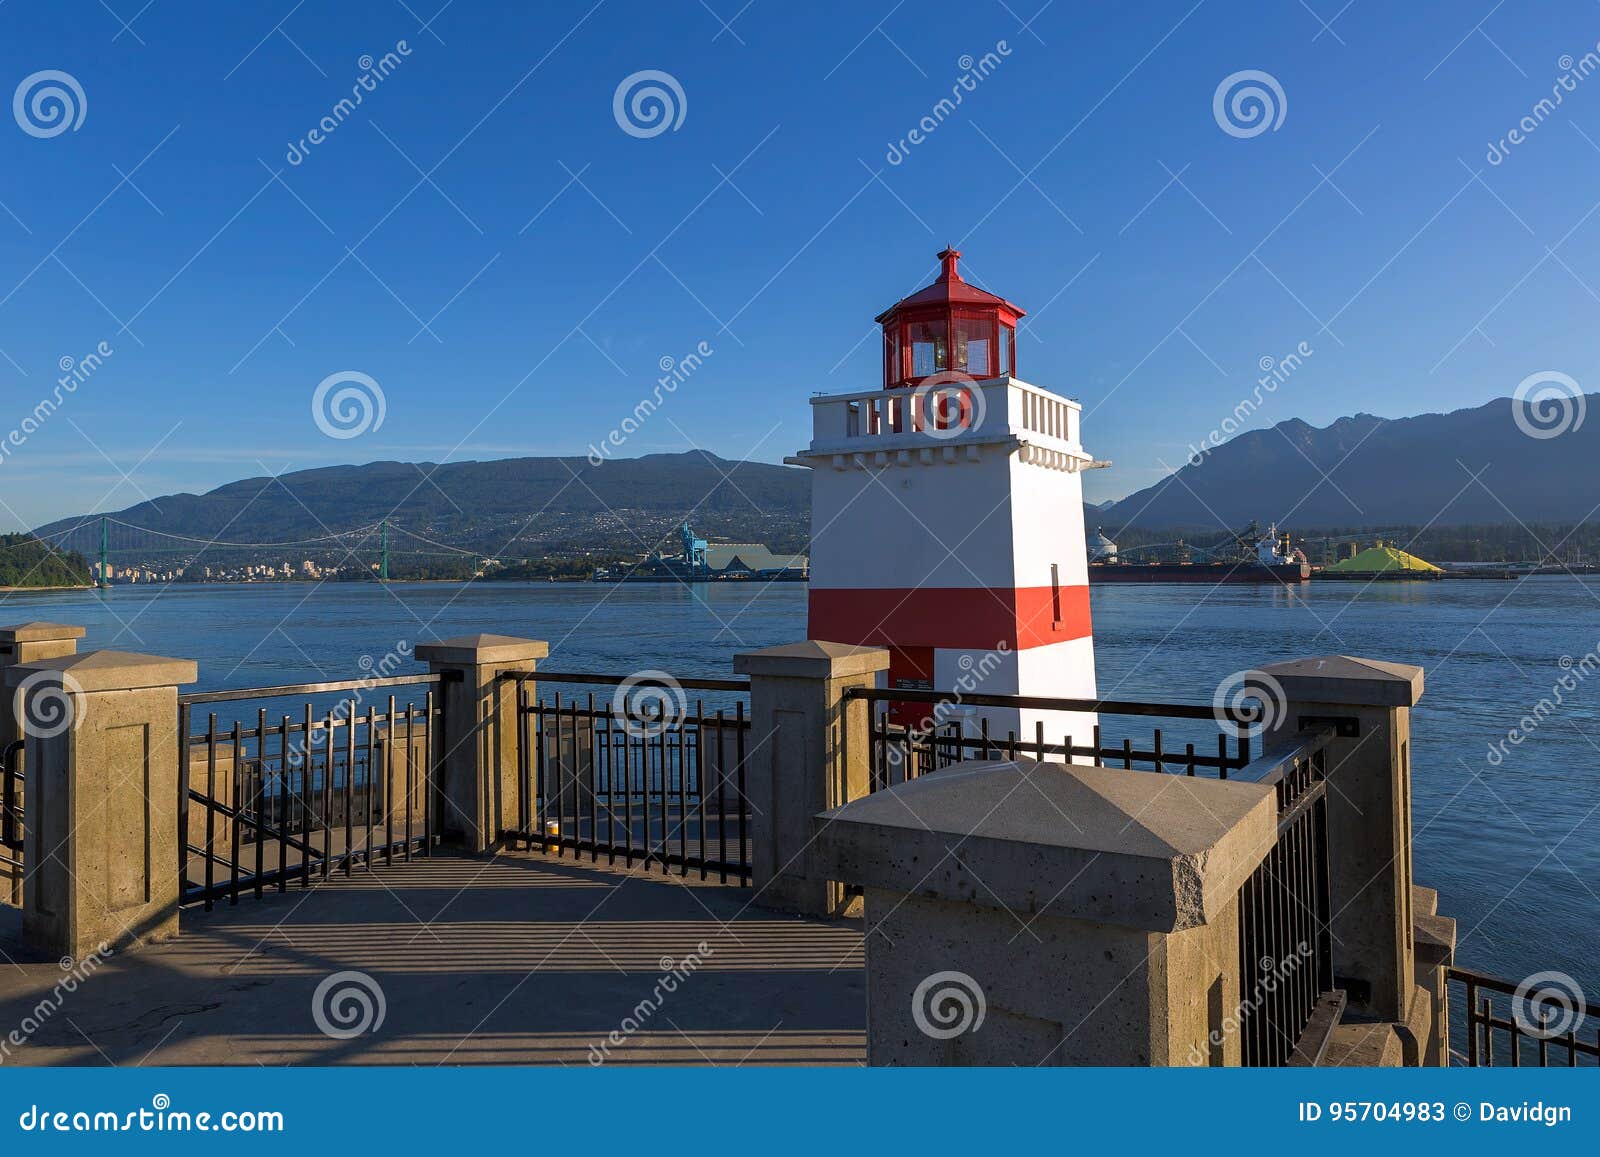 brockton point lighthouse in vancouver bc